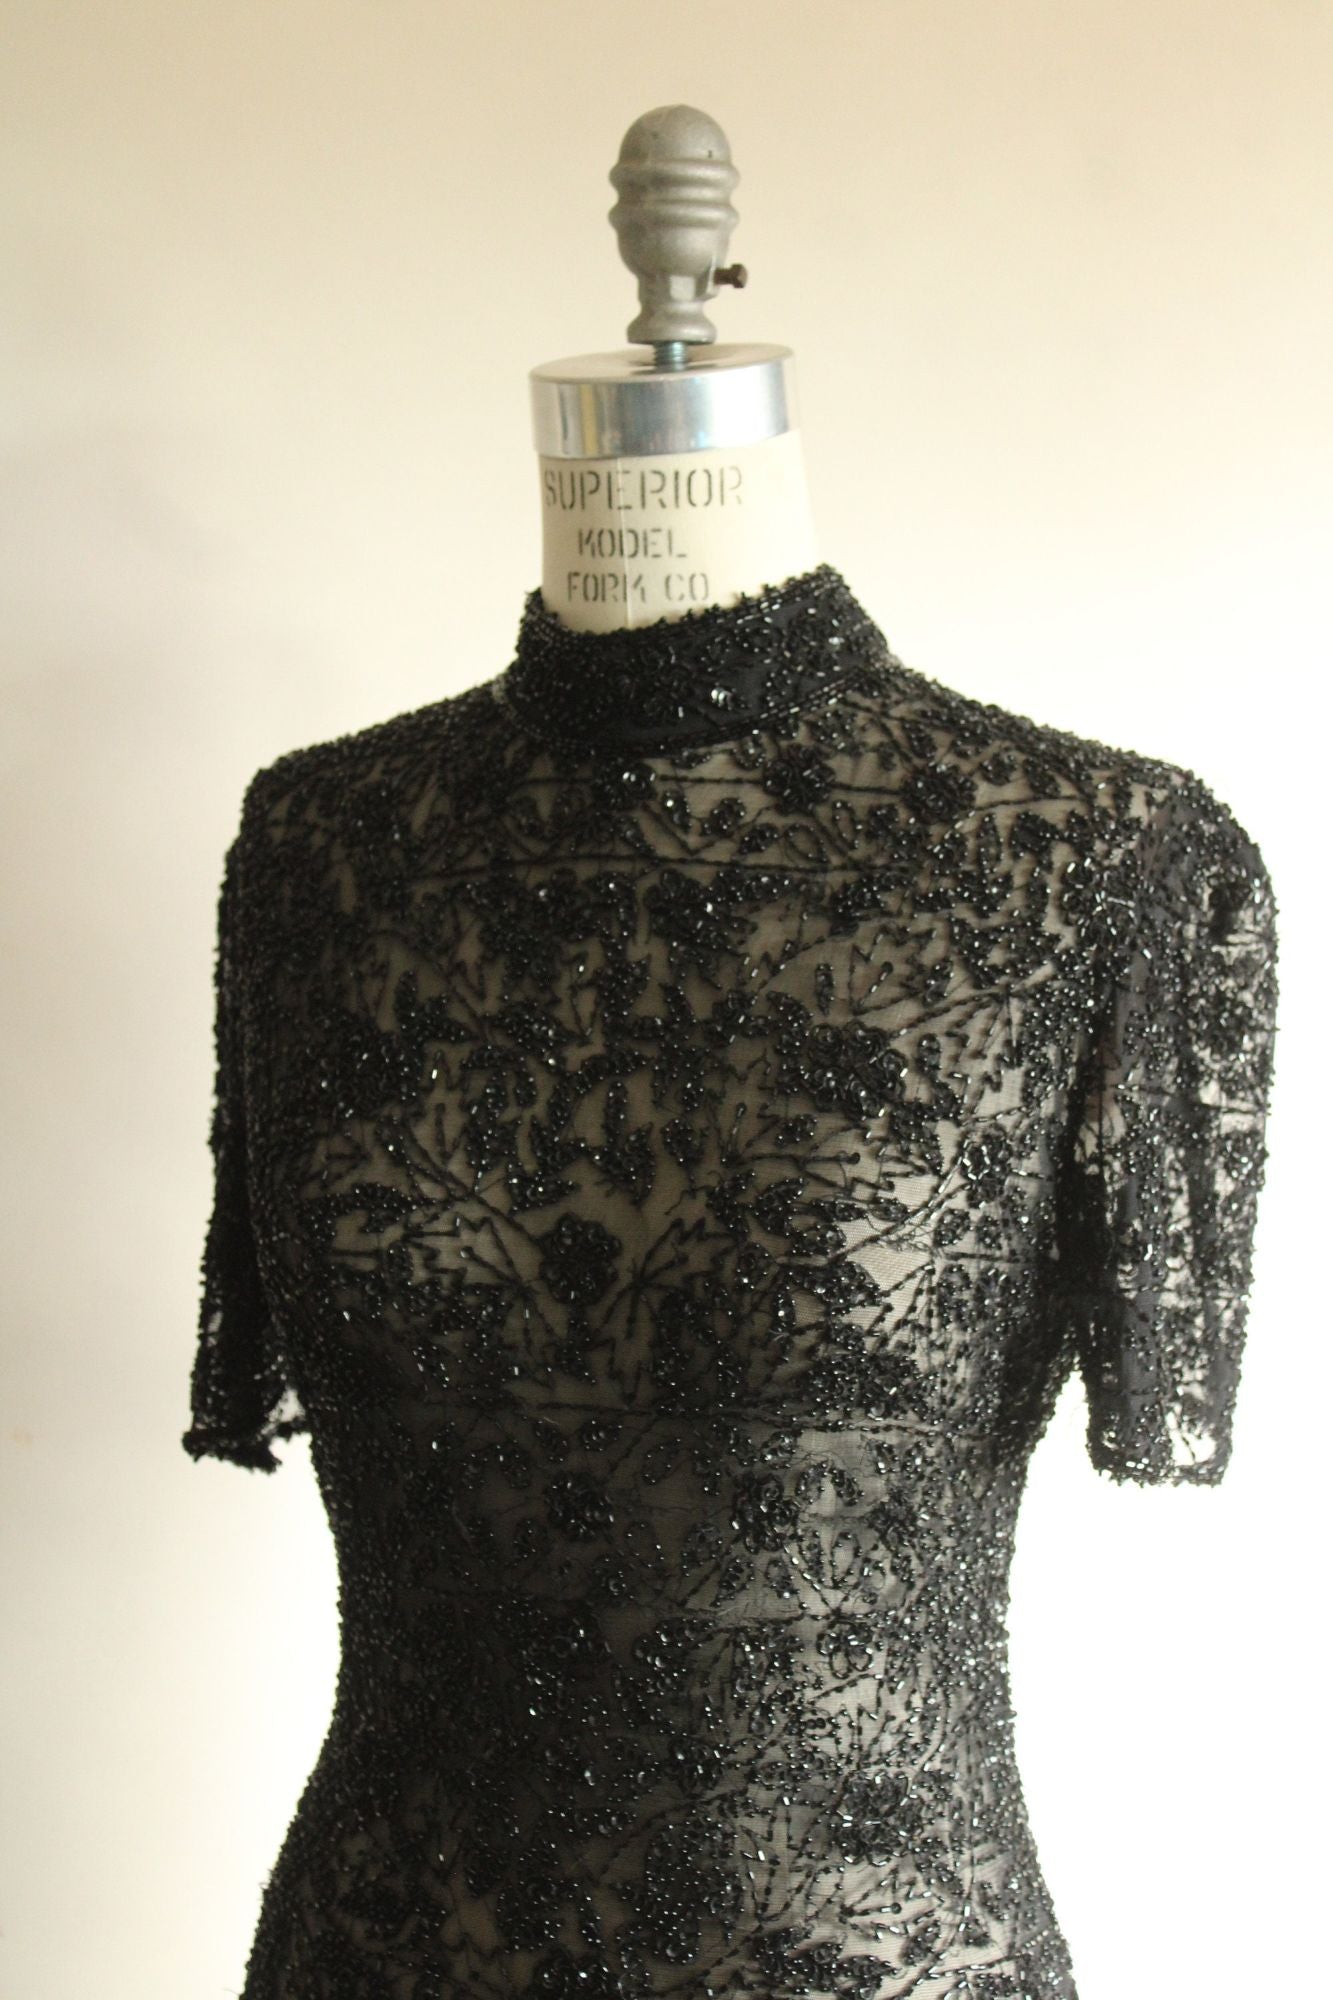 Vintage 1990s Marina by Marina Bresler Black Beaded Top with Open Back